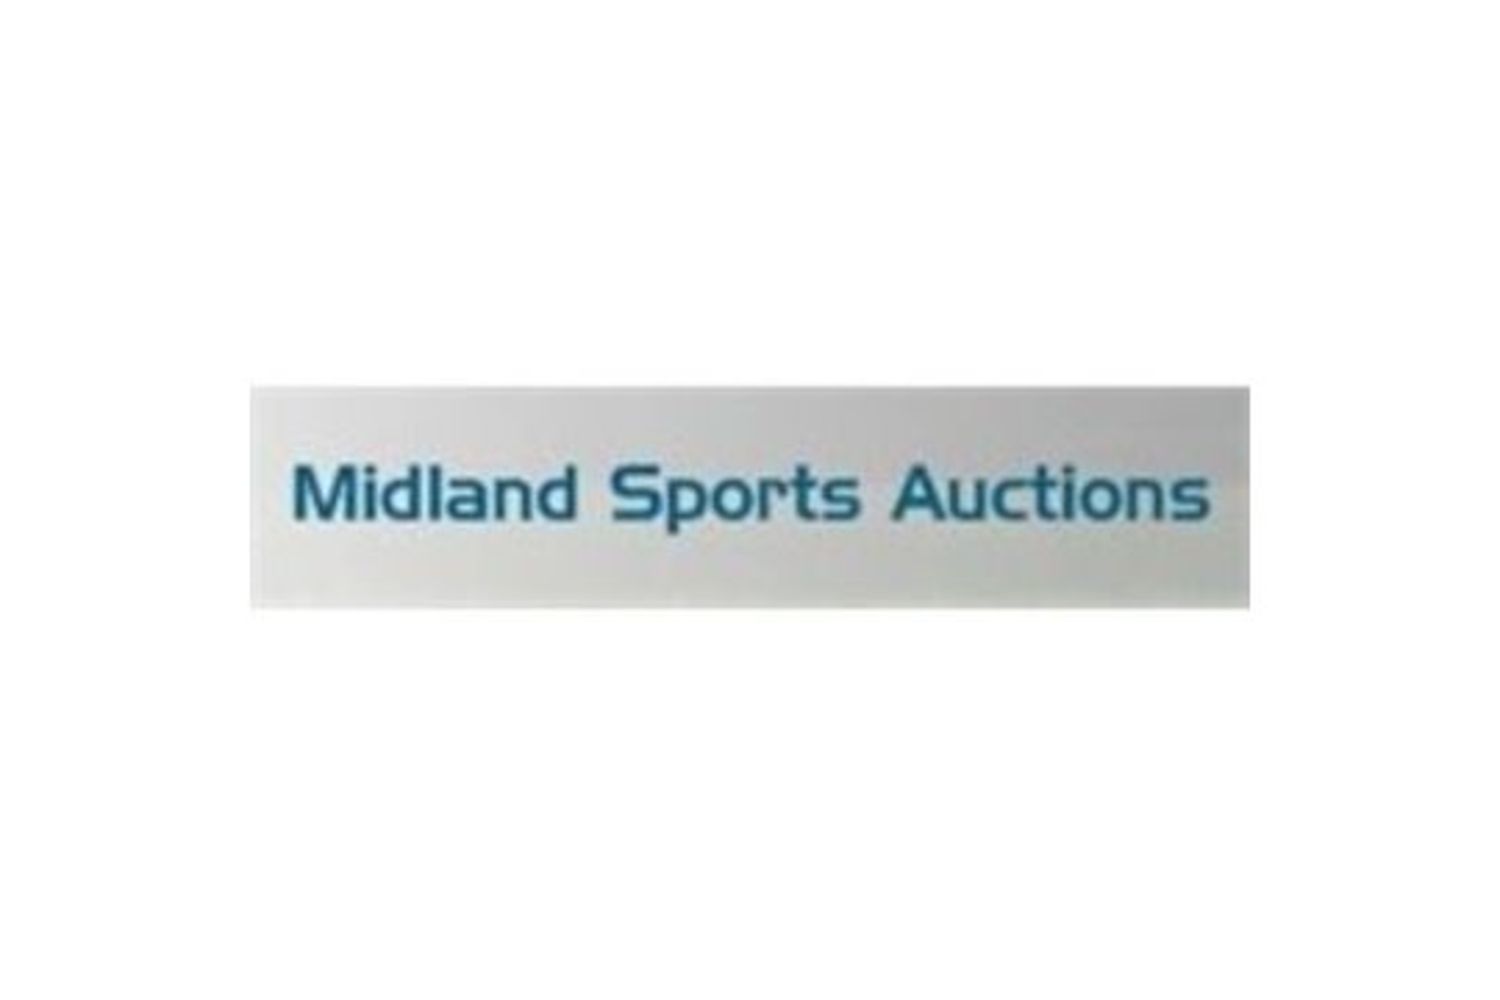 MIDLAND SPORTS AUCTIONS - IN CONJUNCTION WITH WEMBLEY23 SPORTING LTD THREE DAY TIMED AUCTION 27TH, 28TH & 29TH NOV 2022